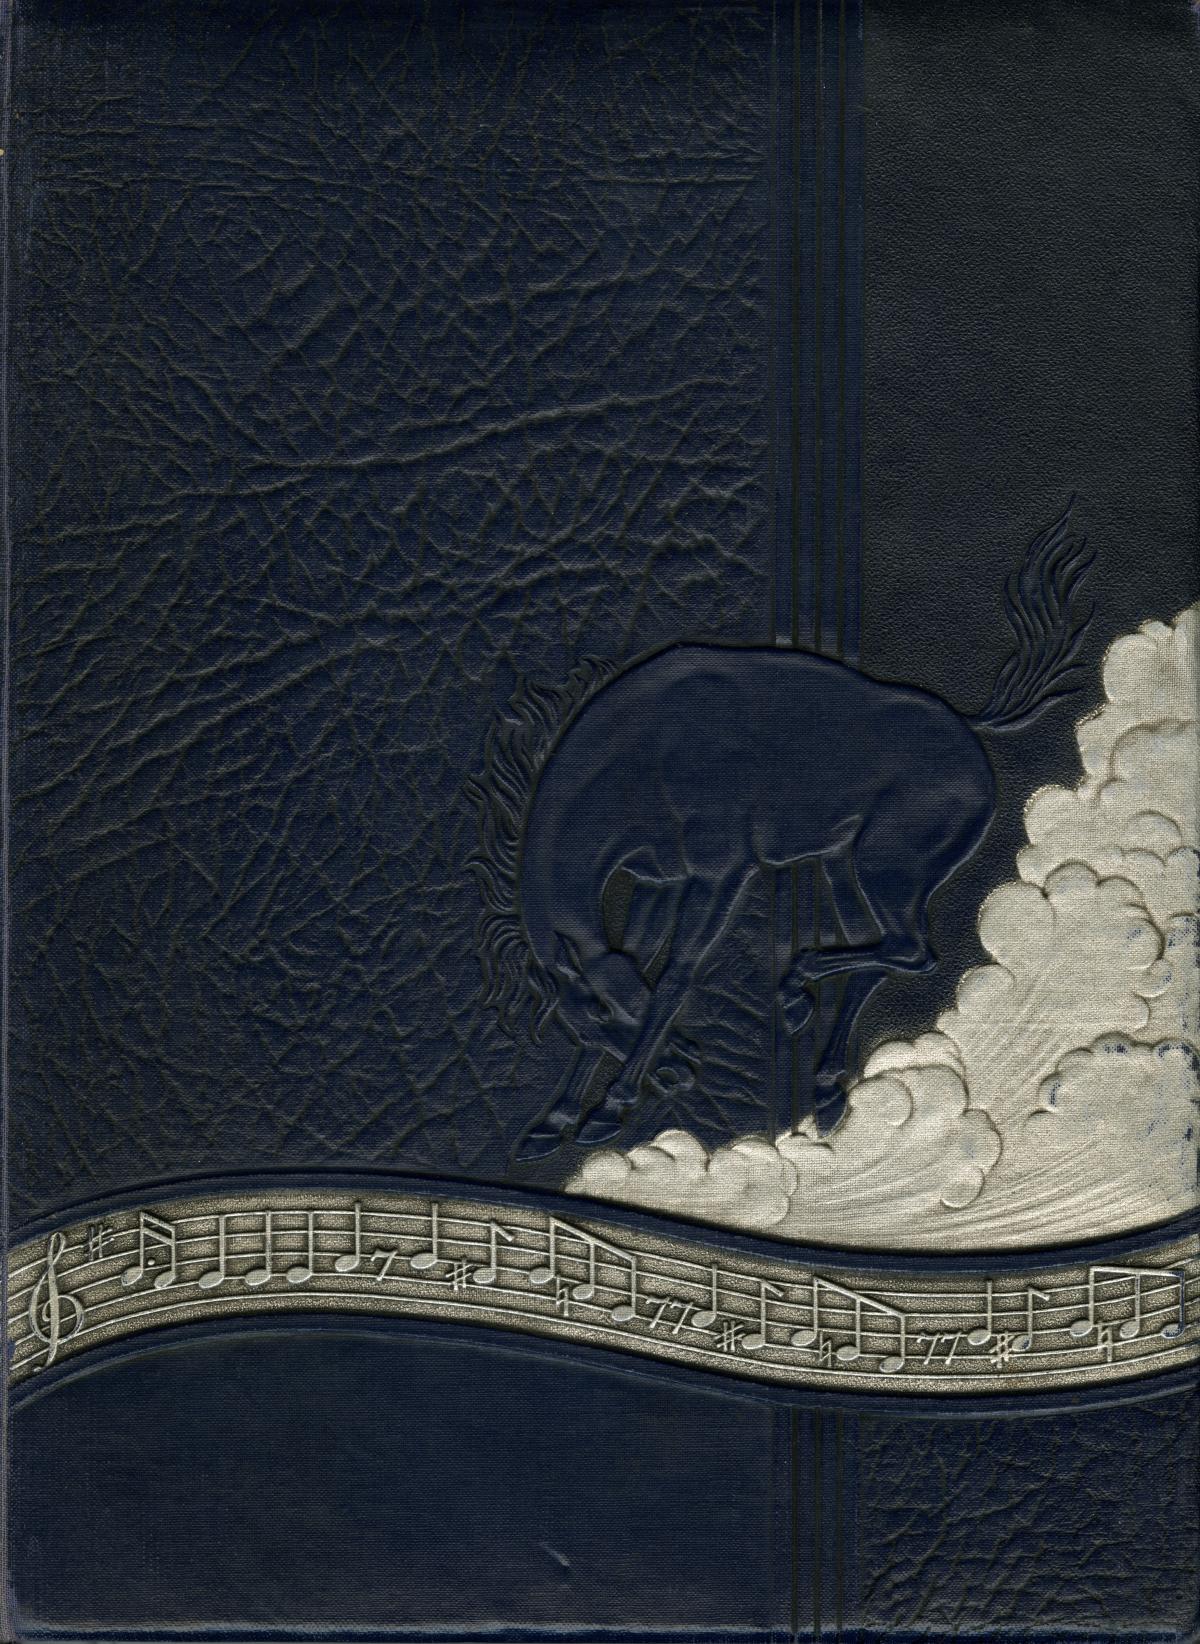 The Bronco, Yearbook of Hardin-Simmons University, 1935
                                                
                                                    Front Cover
                                                